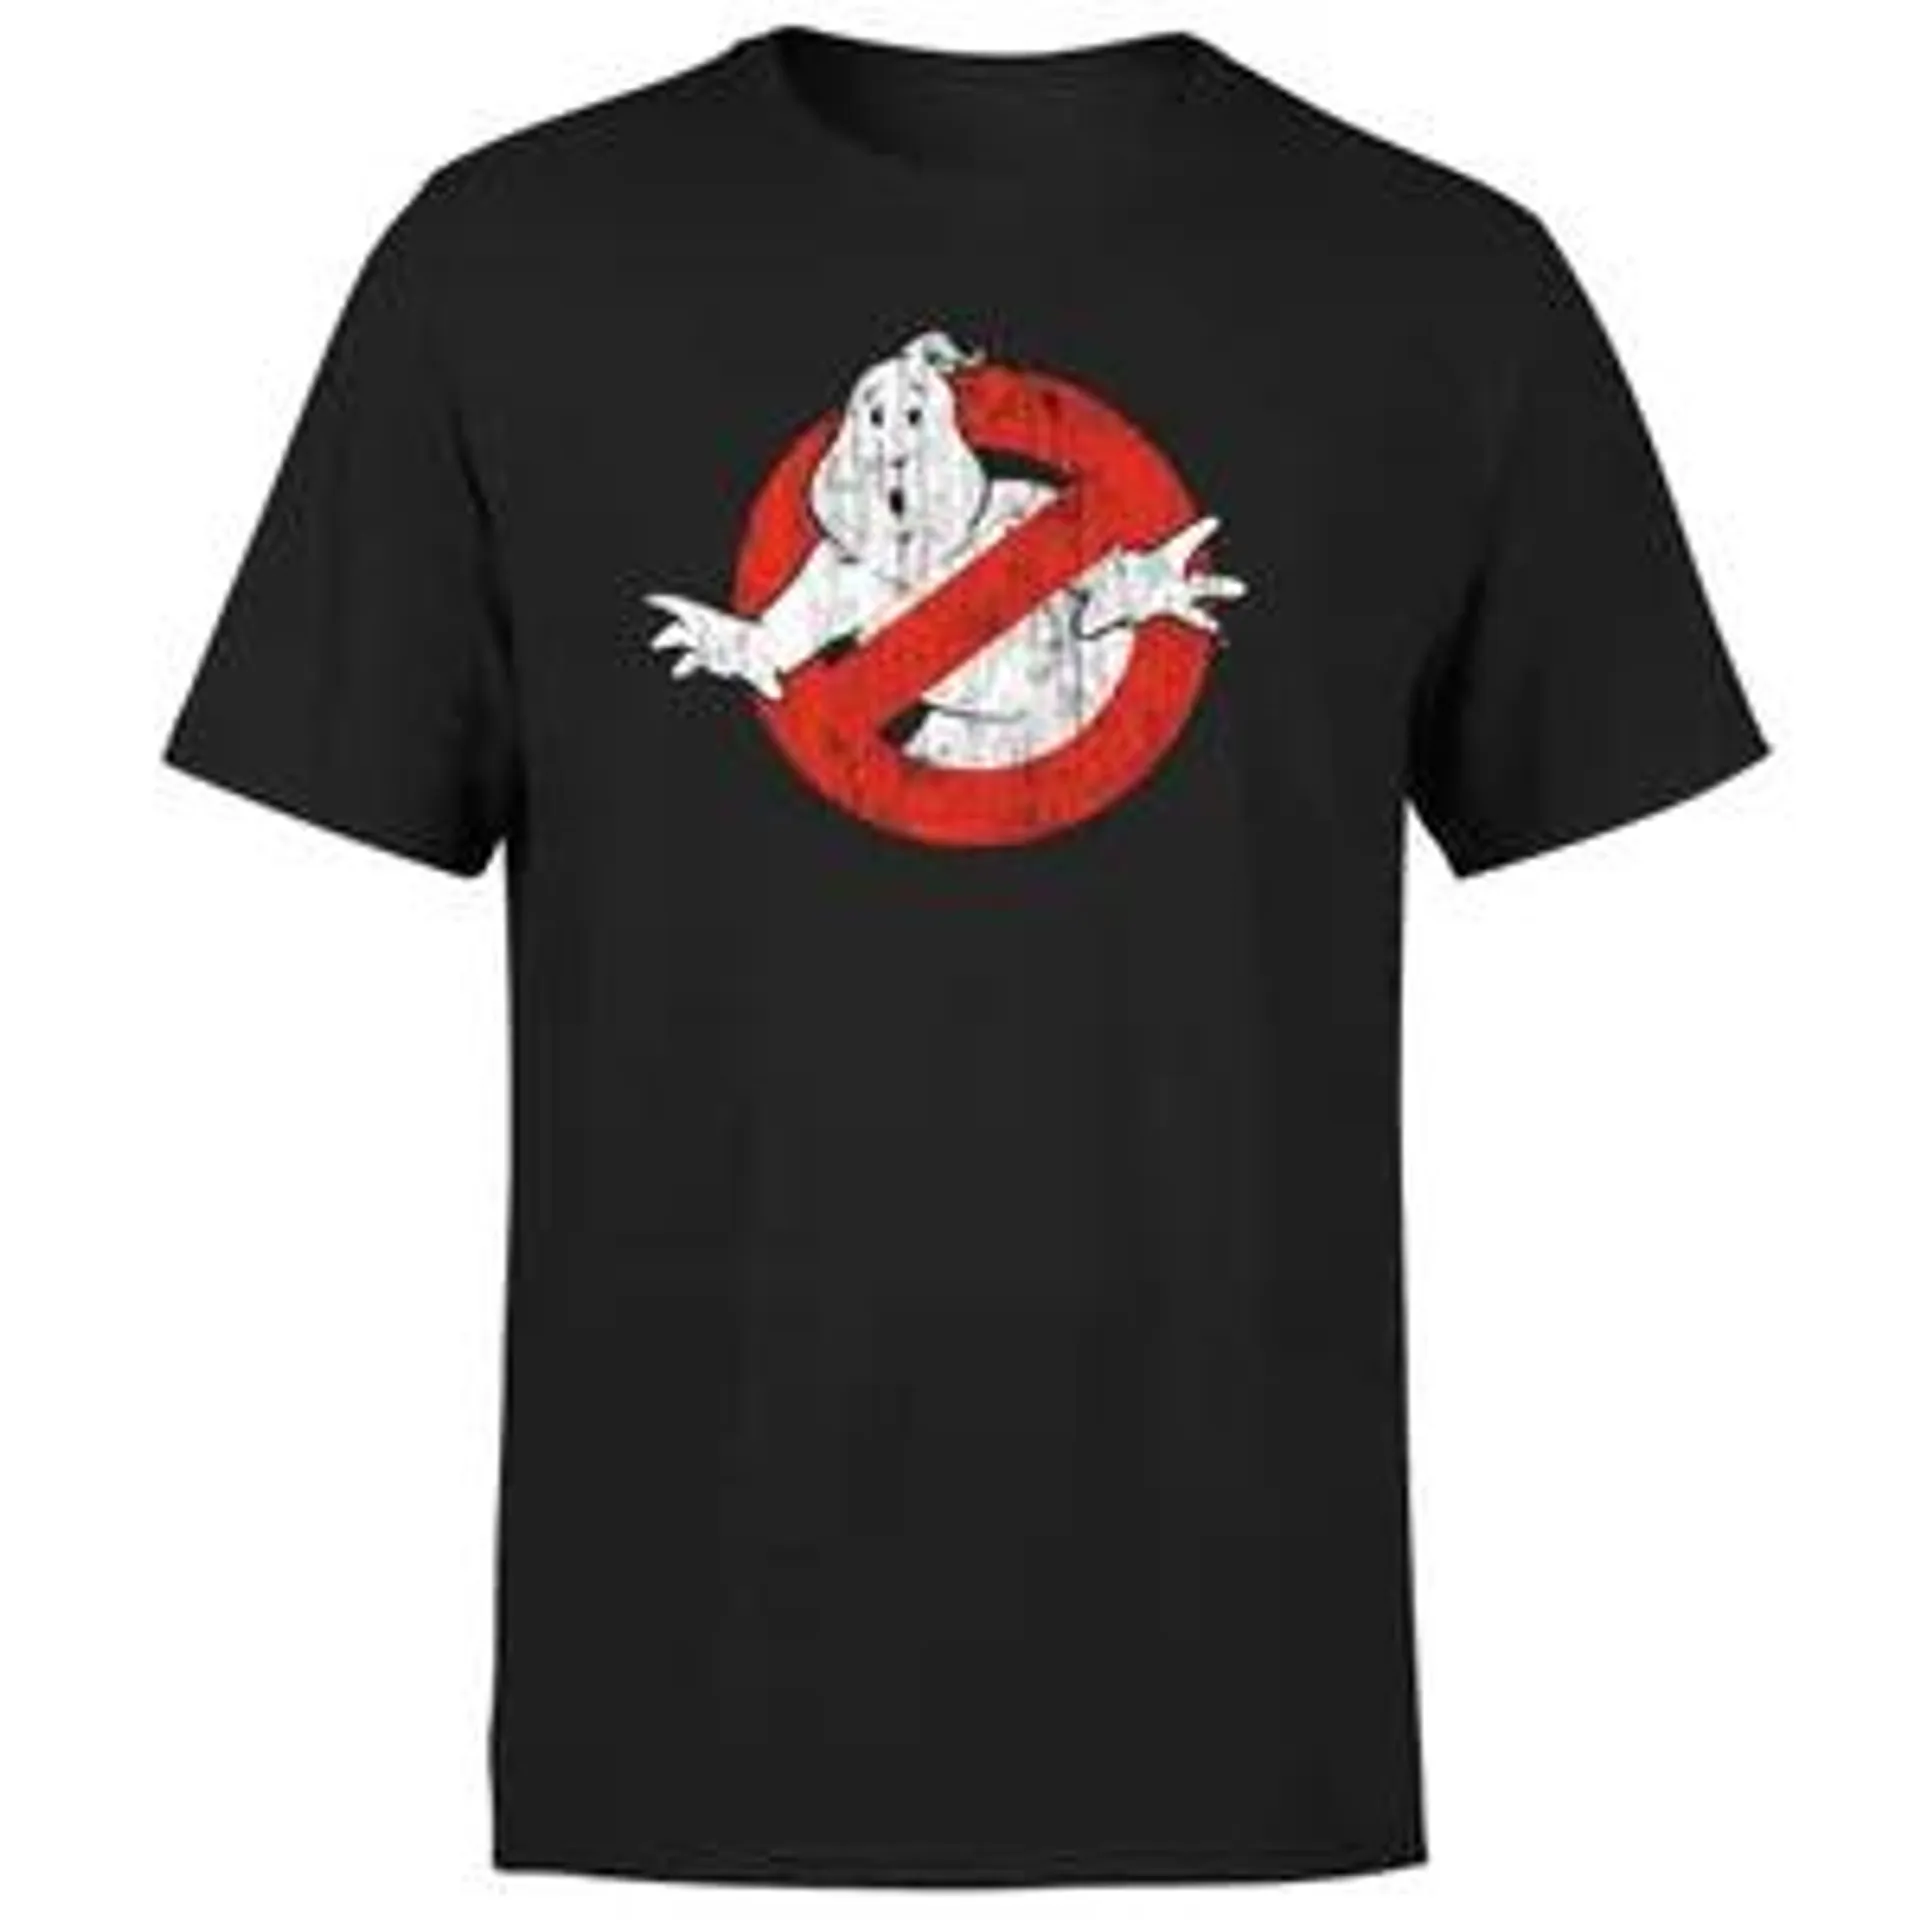 Ghostbusters Tee for £9.99 with Steelbook, 4K or Blu-ray!